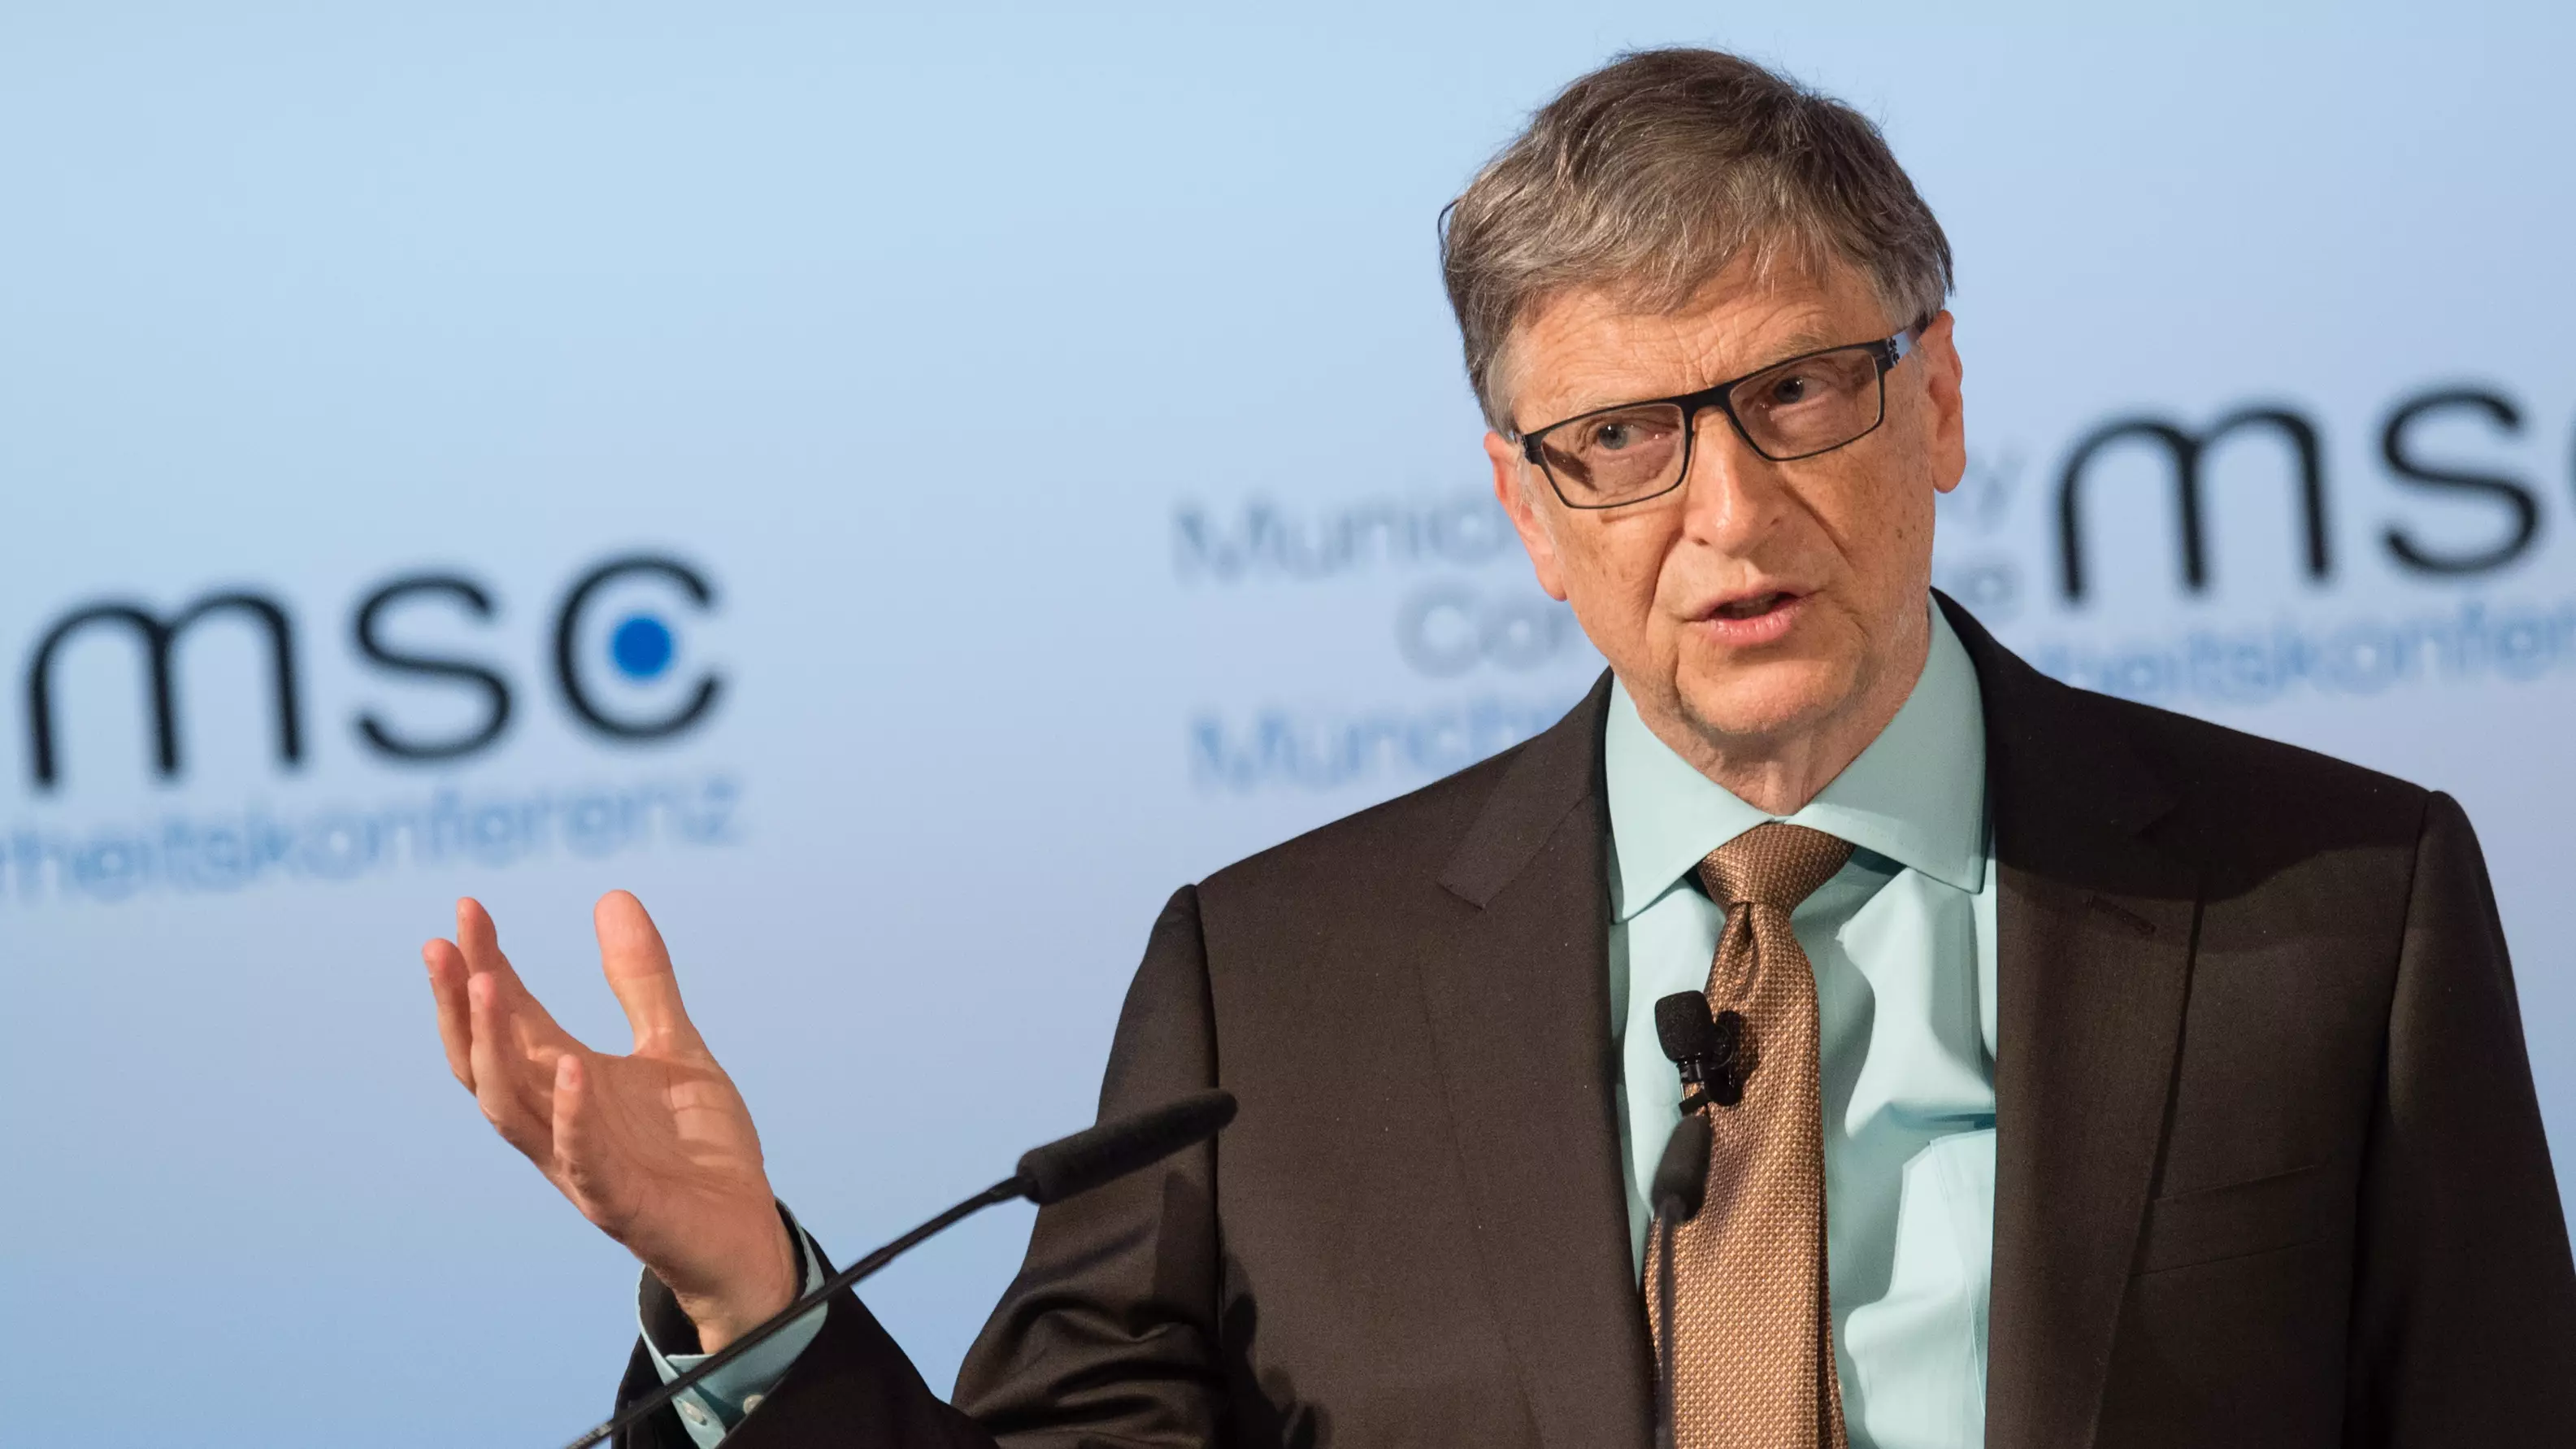 Bill Gates Warns That Mosquito-Borne Disease Could Be Mankind's Greatest Threat